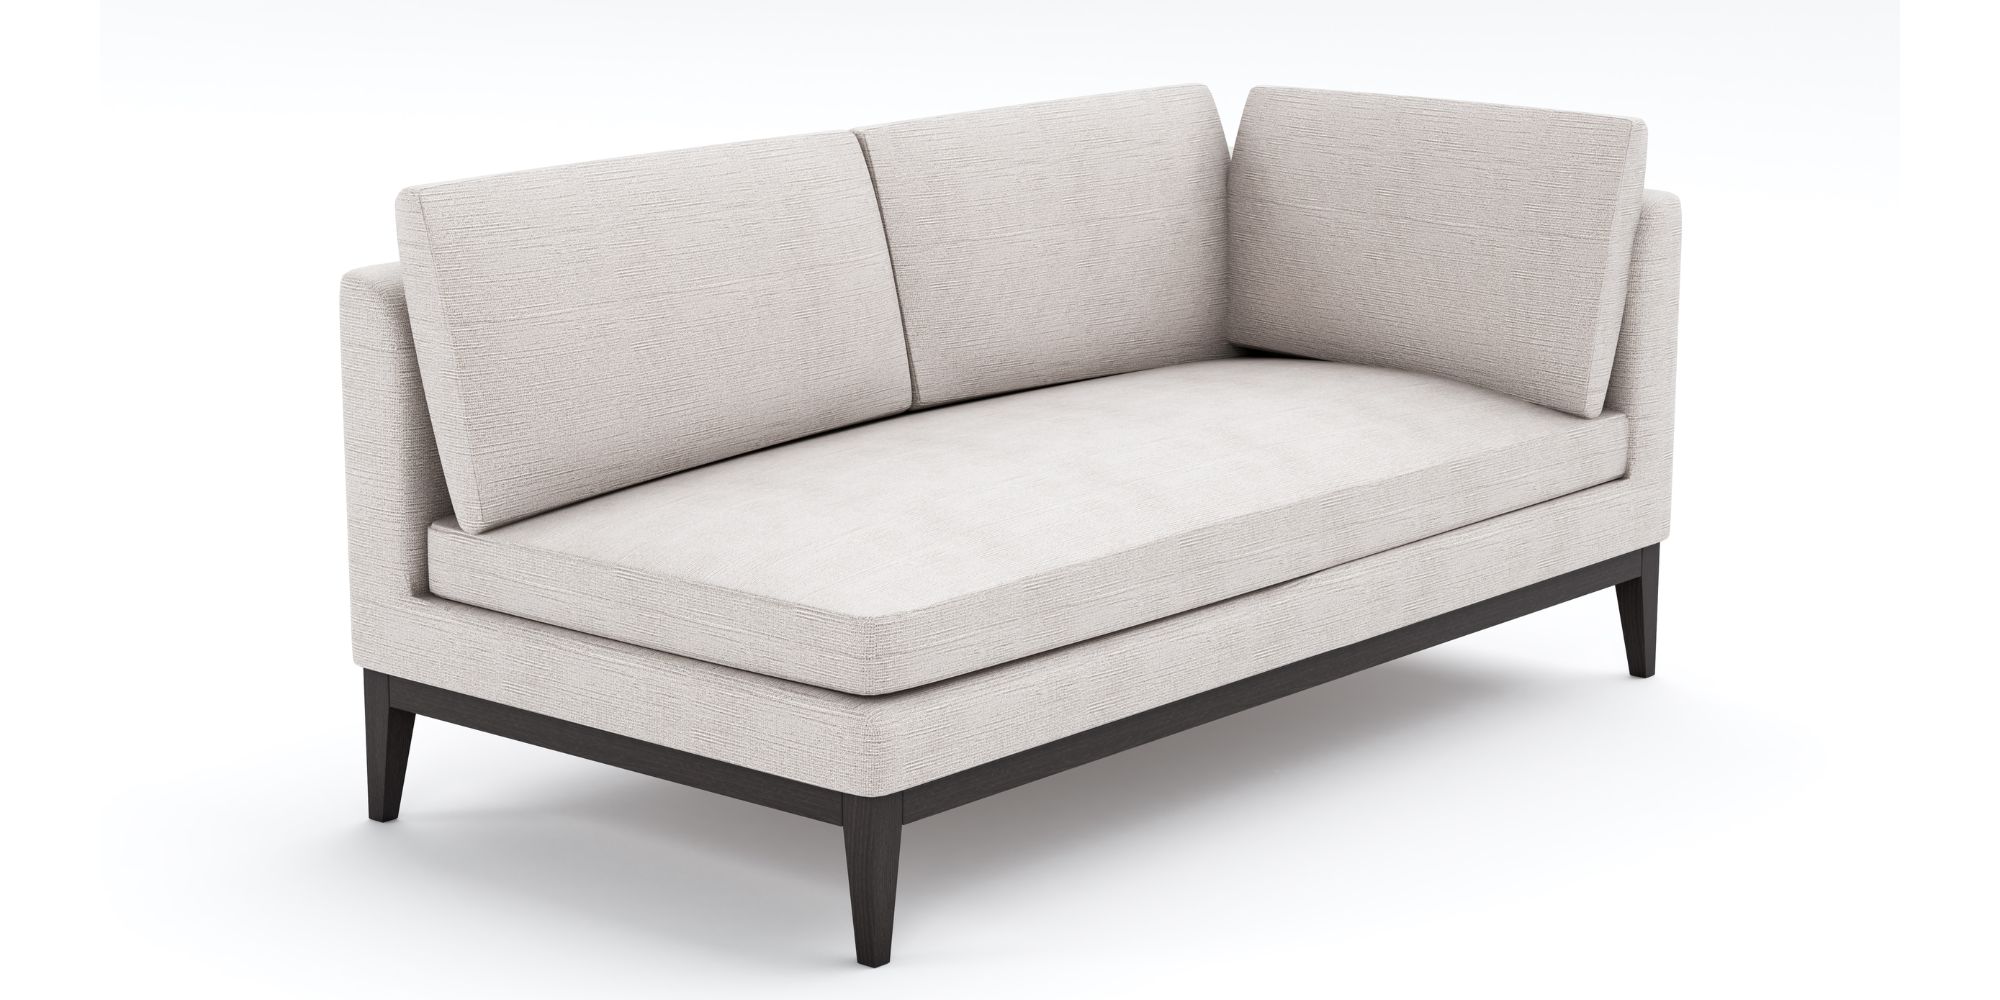 Chuchumber Left Arm End Section in Outdoor Modular Sofas for Chuchumber collection